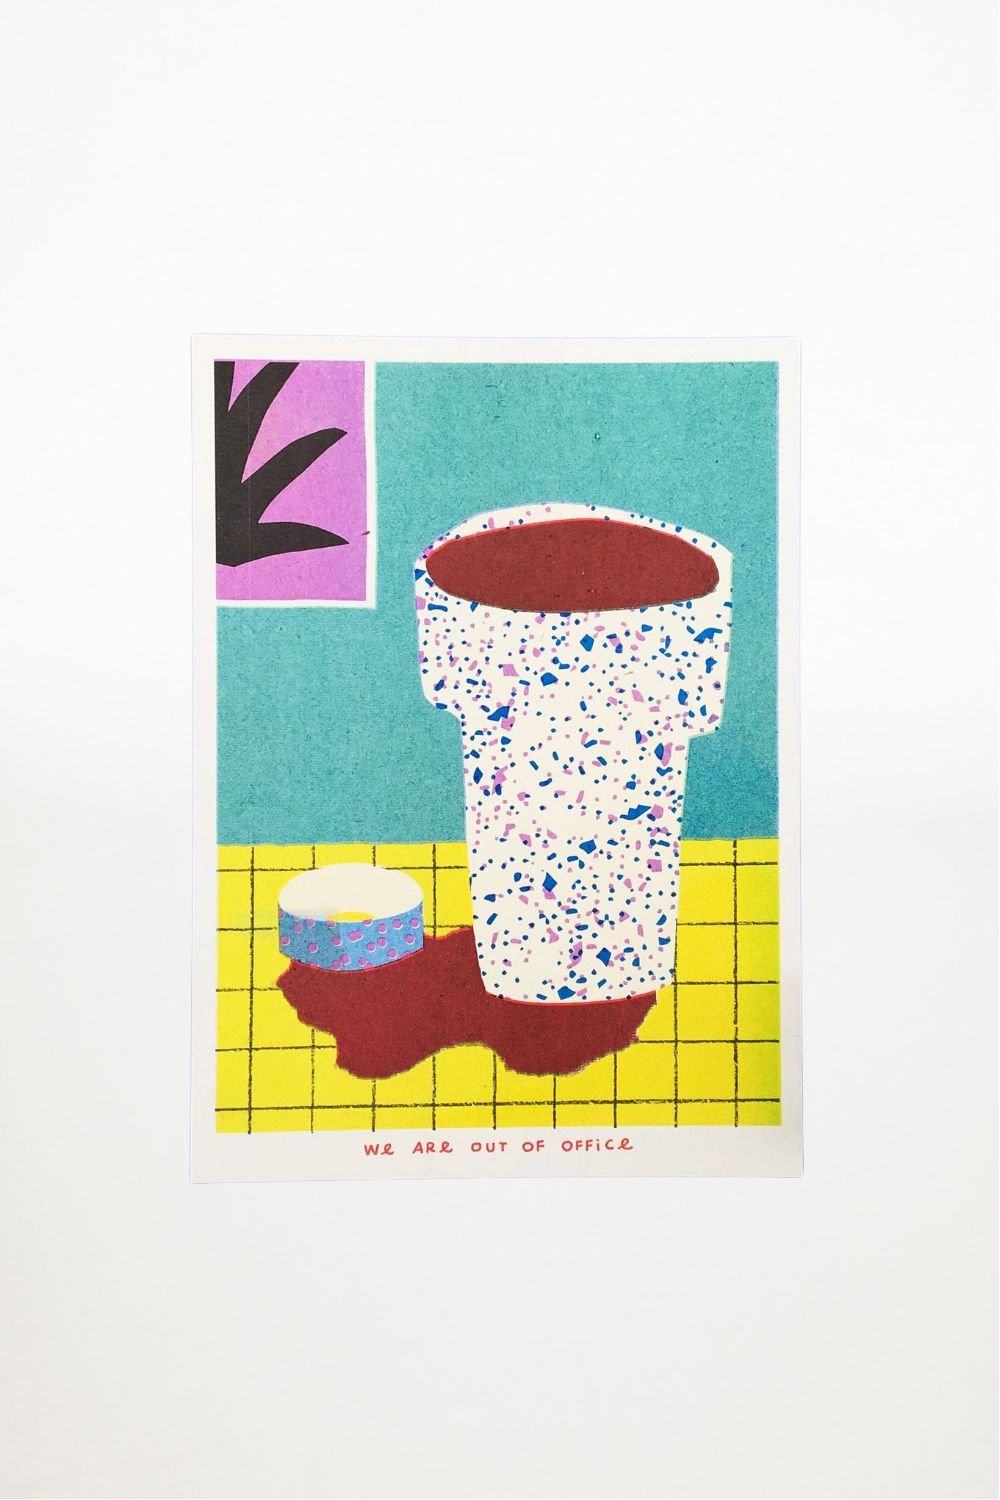 We Are Out of Office - A Risograph Print of a Still Life Favourite Cups - Ensemble Studios